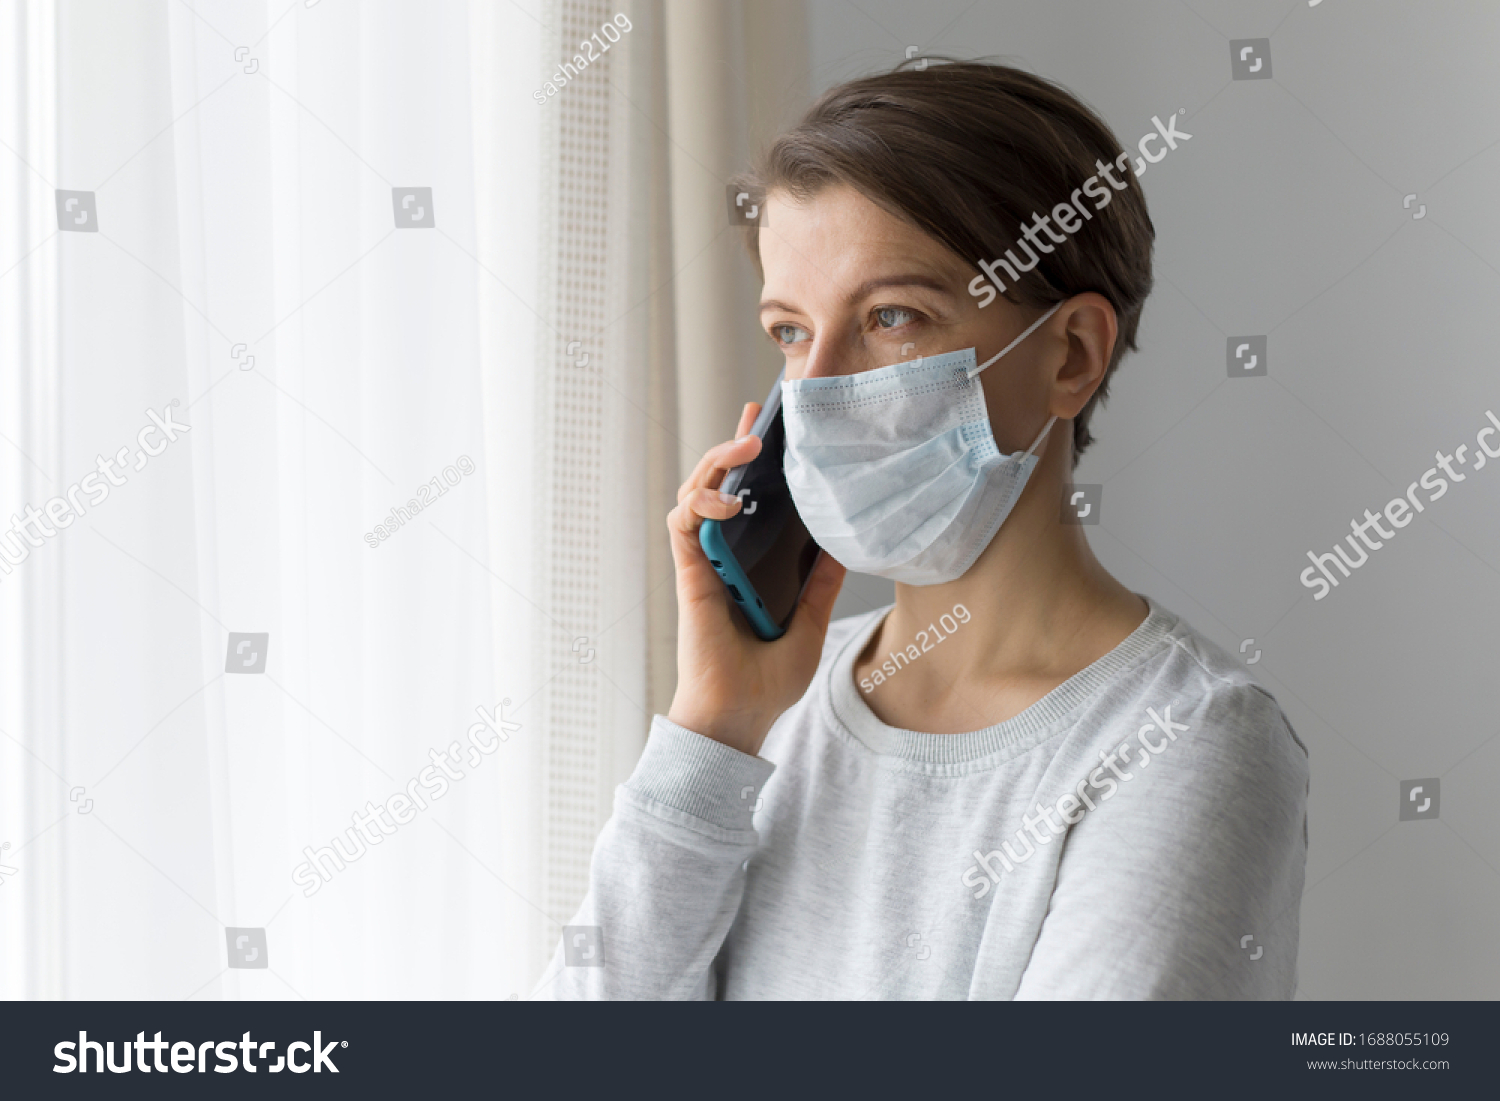 A young woman in a medical mask in quarantine is talking on the phone. outbreak concept #1688055109